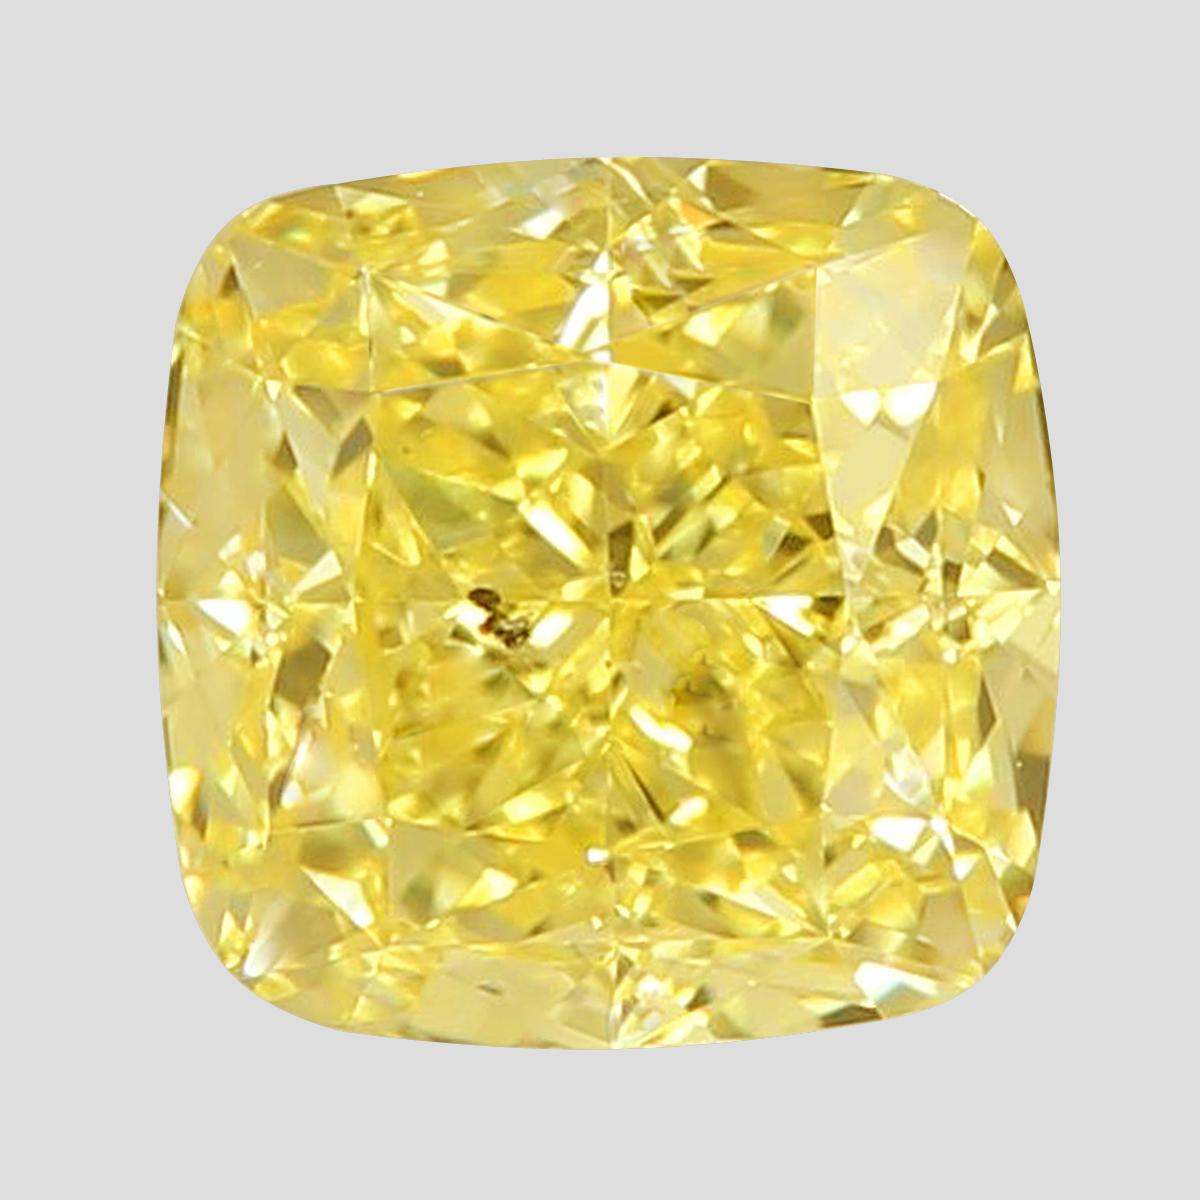 GIA Certified 5.14 Carat Fancy Yellow Diamond Solitaire Ring
fancy  yellow
two tapered baguette vs2 e color
18 carats white and yellow gold handmade in Italy 